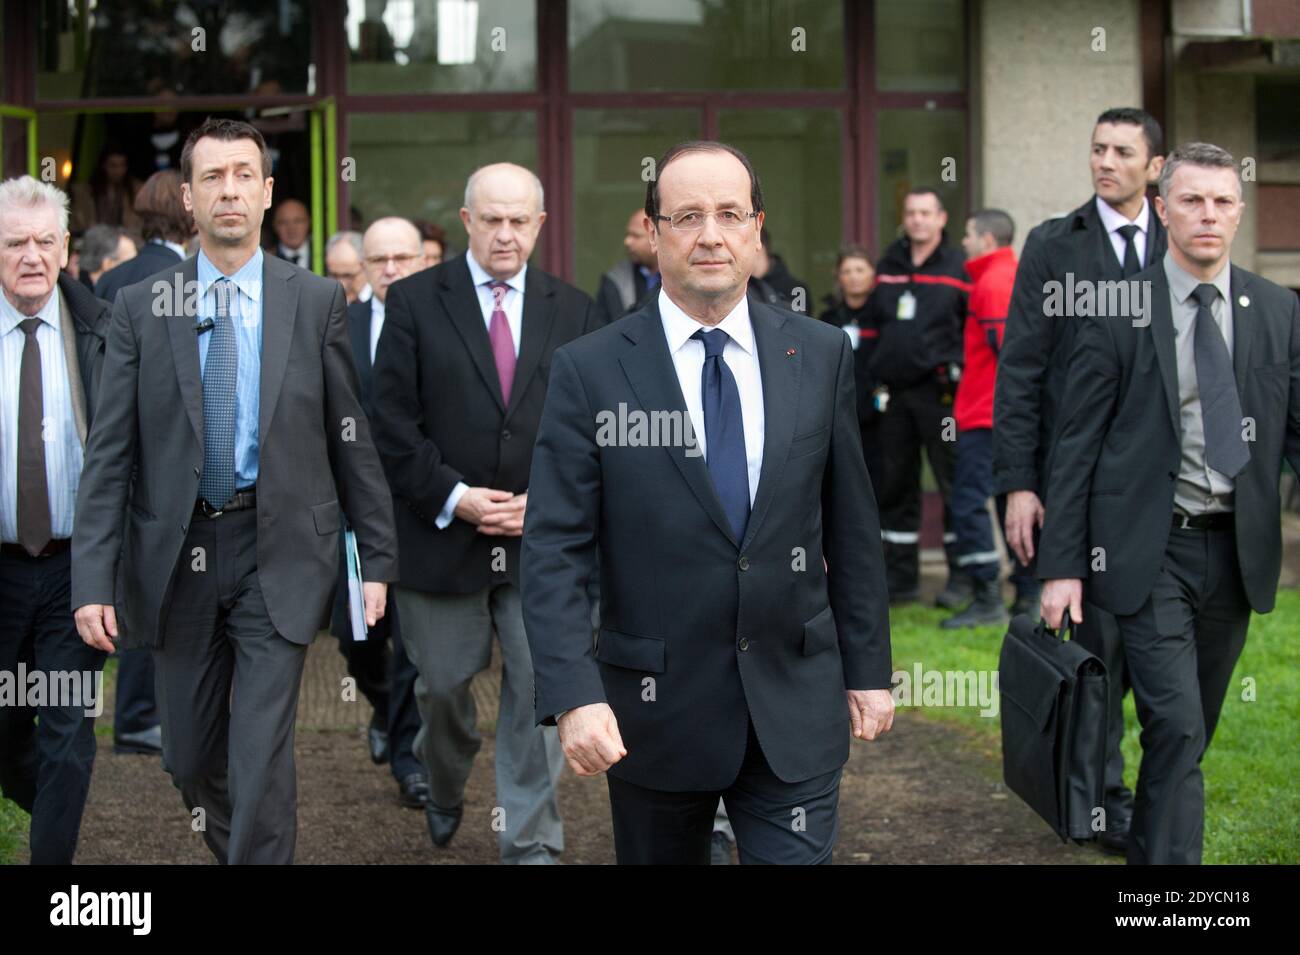 French President Francois Hollande visiting the chemistry laboratory known as 'Polymeres Organiques (LCPO)' in Talence, France, on January 10, 2013. Hollande was in the region for a visit dedicated to future investments and high-tech companies. Photo by Baptiste Fenouil/Pool/ABACAPRESS.COM Stock Photo